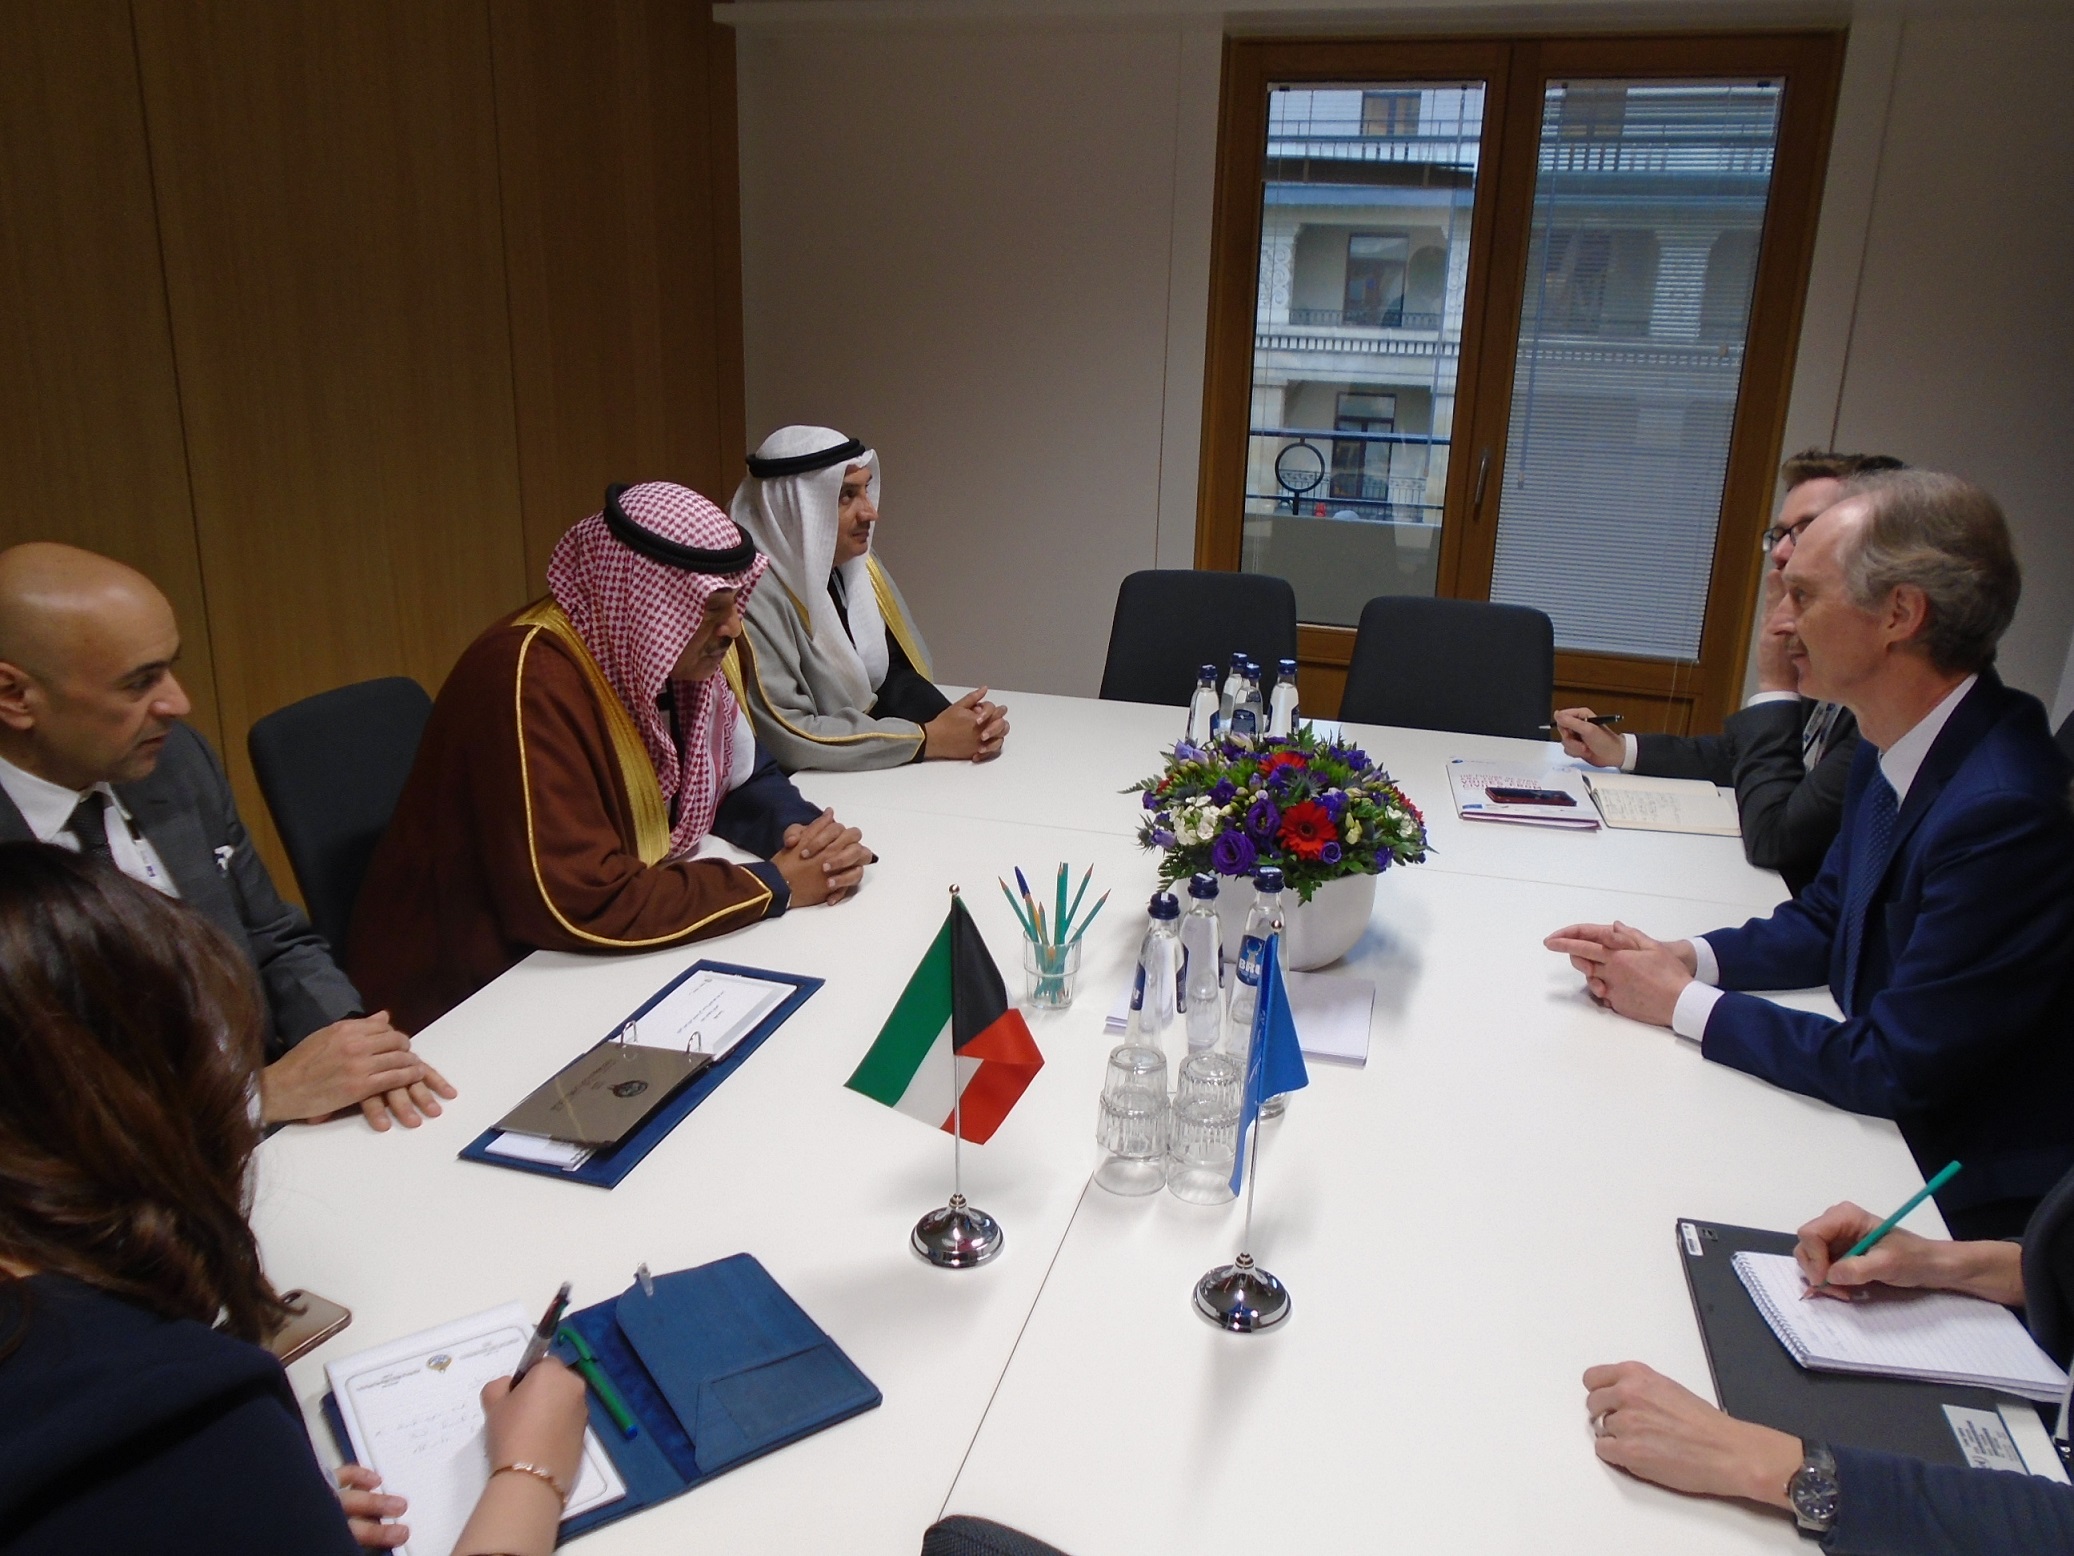 Kuwaiti Deputy Prime Minister and Foreign Minister Sheikh Sabah Khaled Al-Hamad Al-Sabah meets with UN Special Envoy for Syria Geir Pedersen